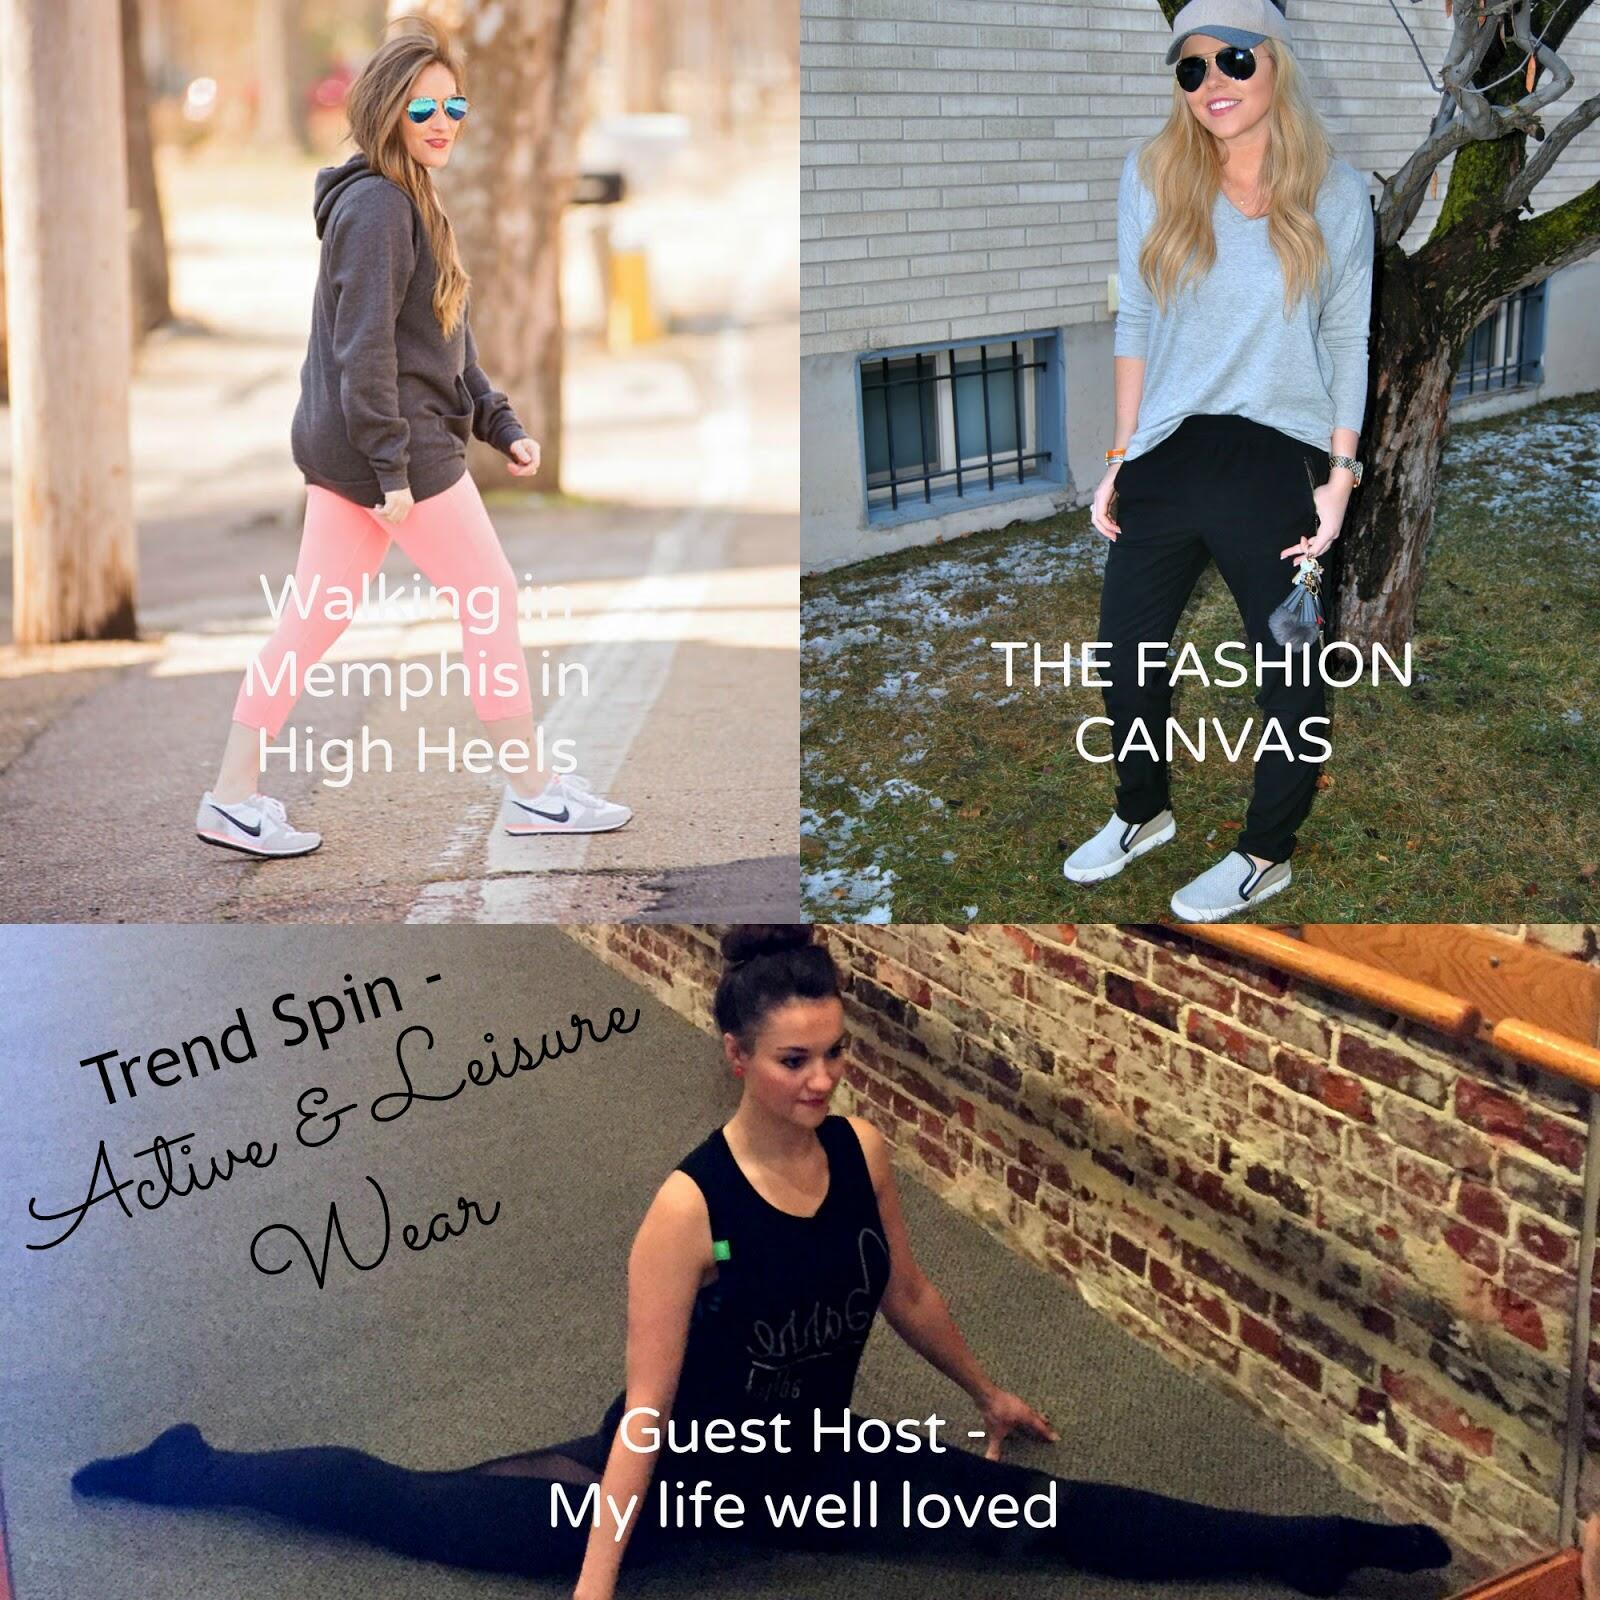 Trend Spin Linkup - Athletic Wear